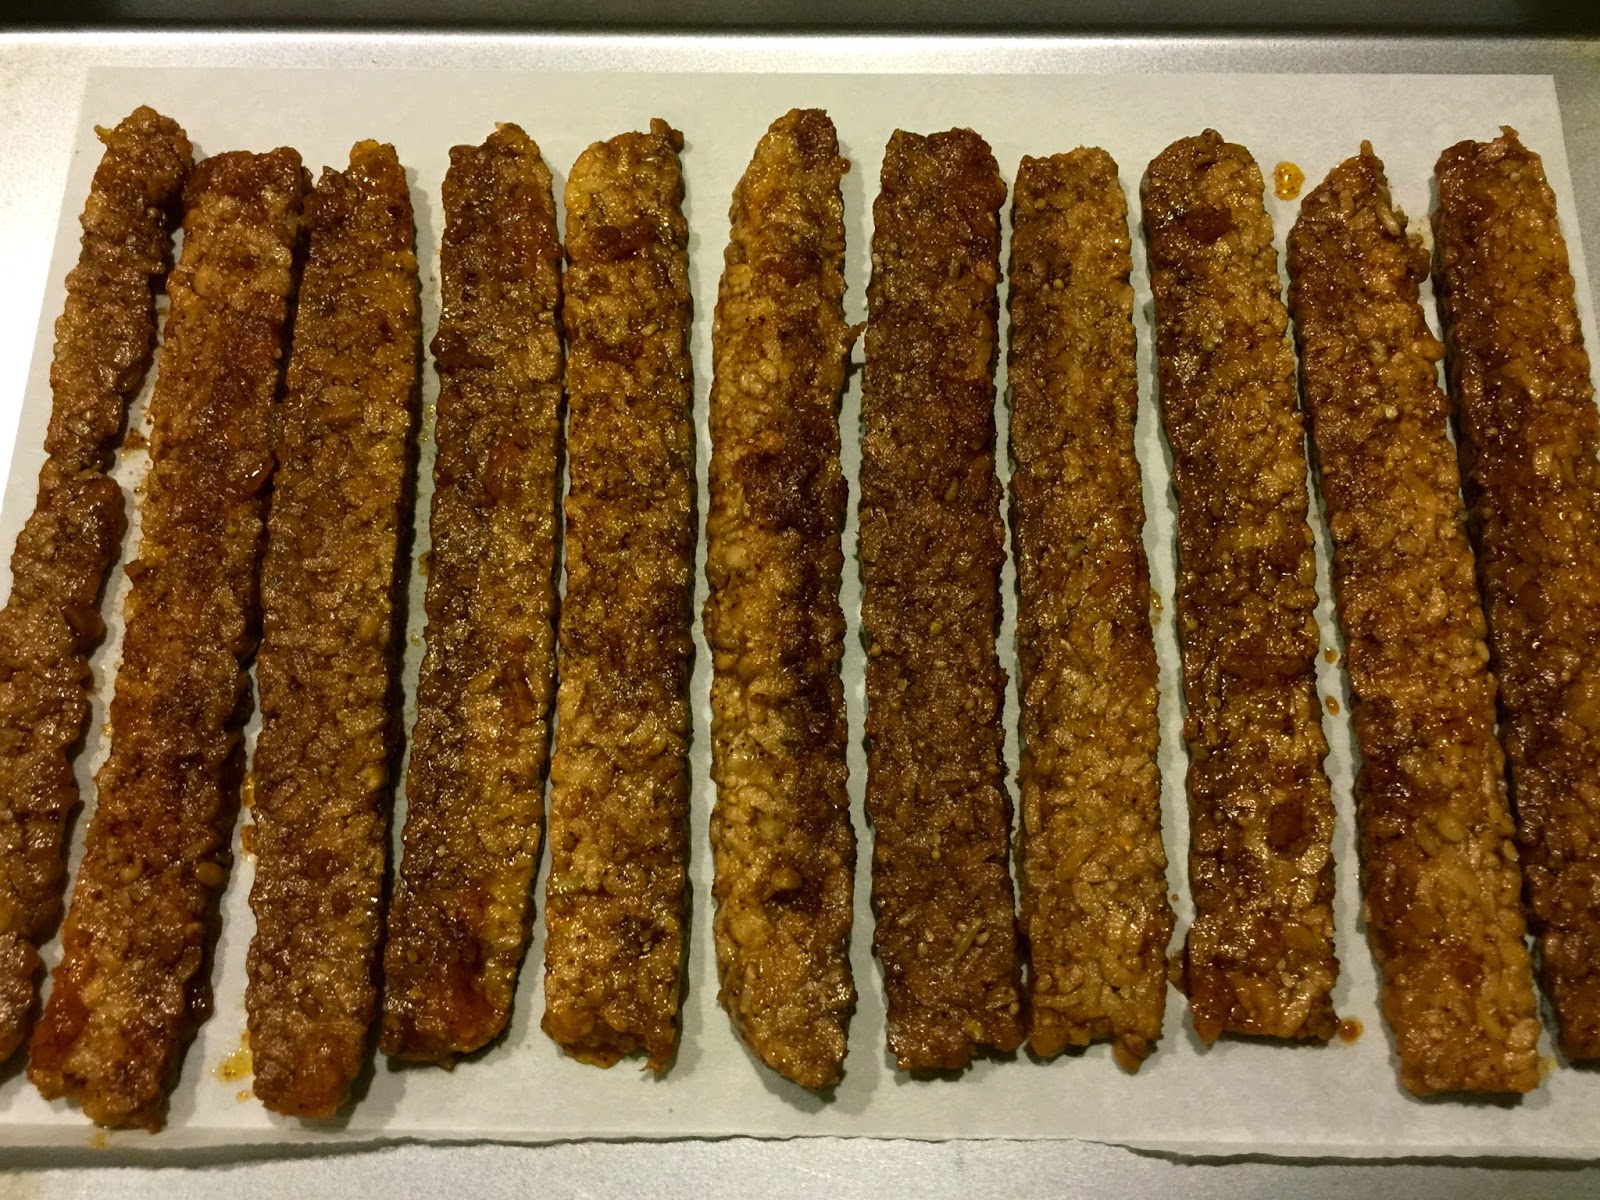 Husband Tested Recipes From Alice's Kitchen: Tempeh “Bacon”